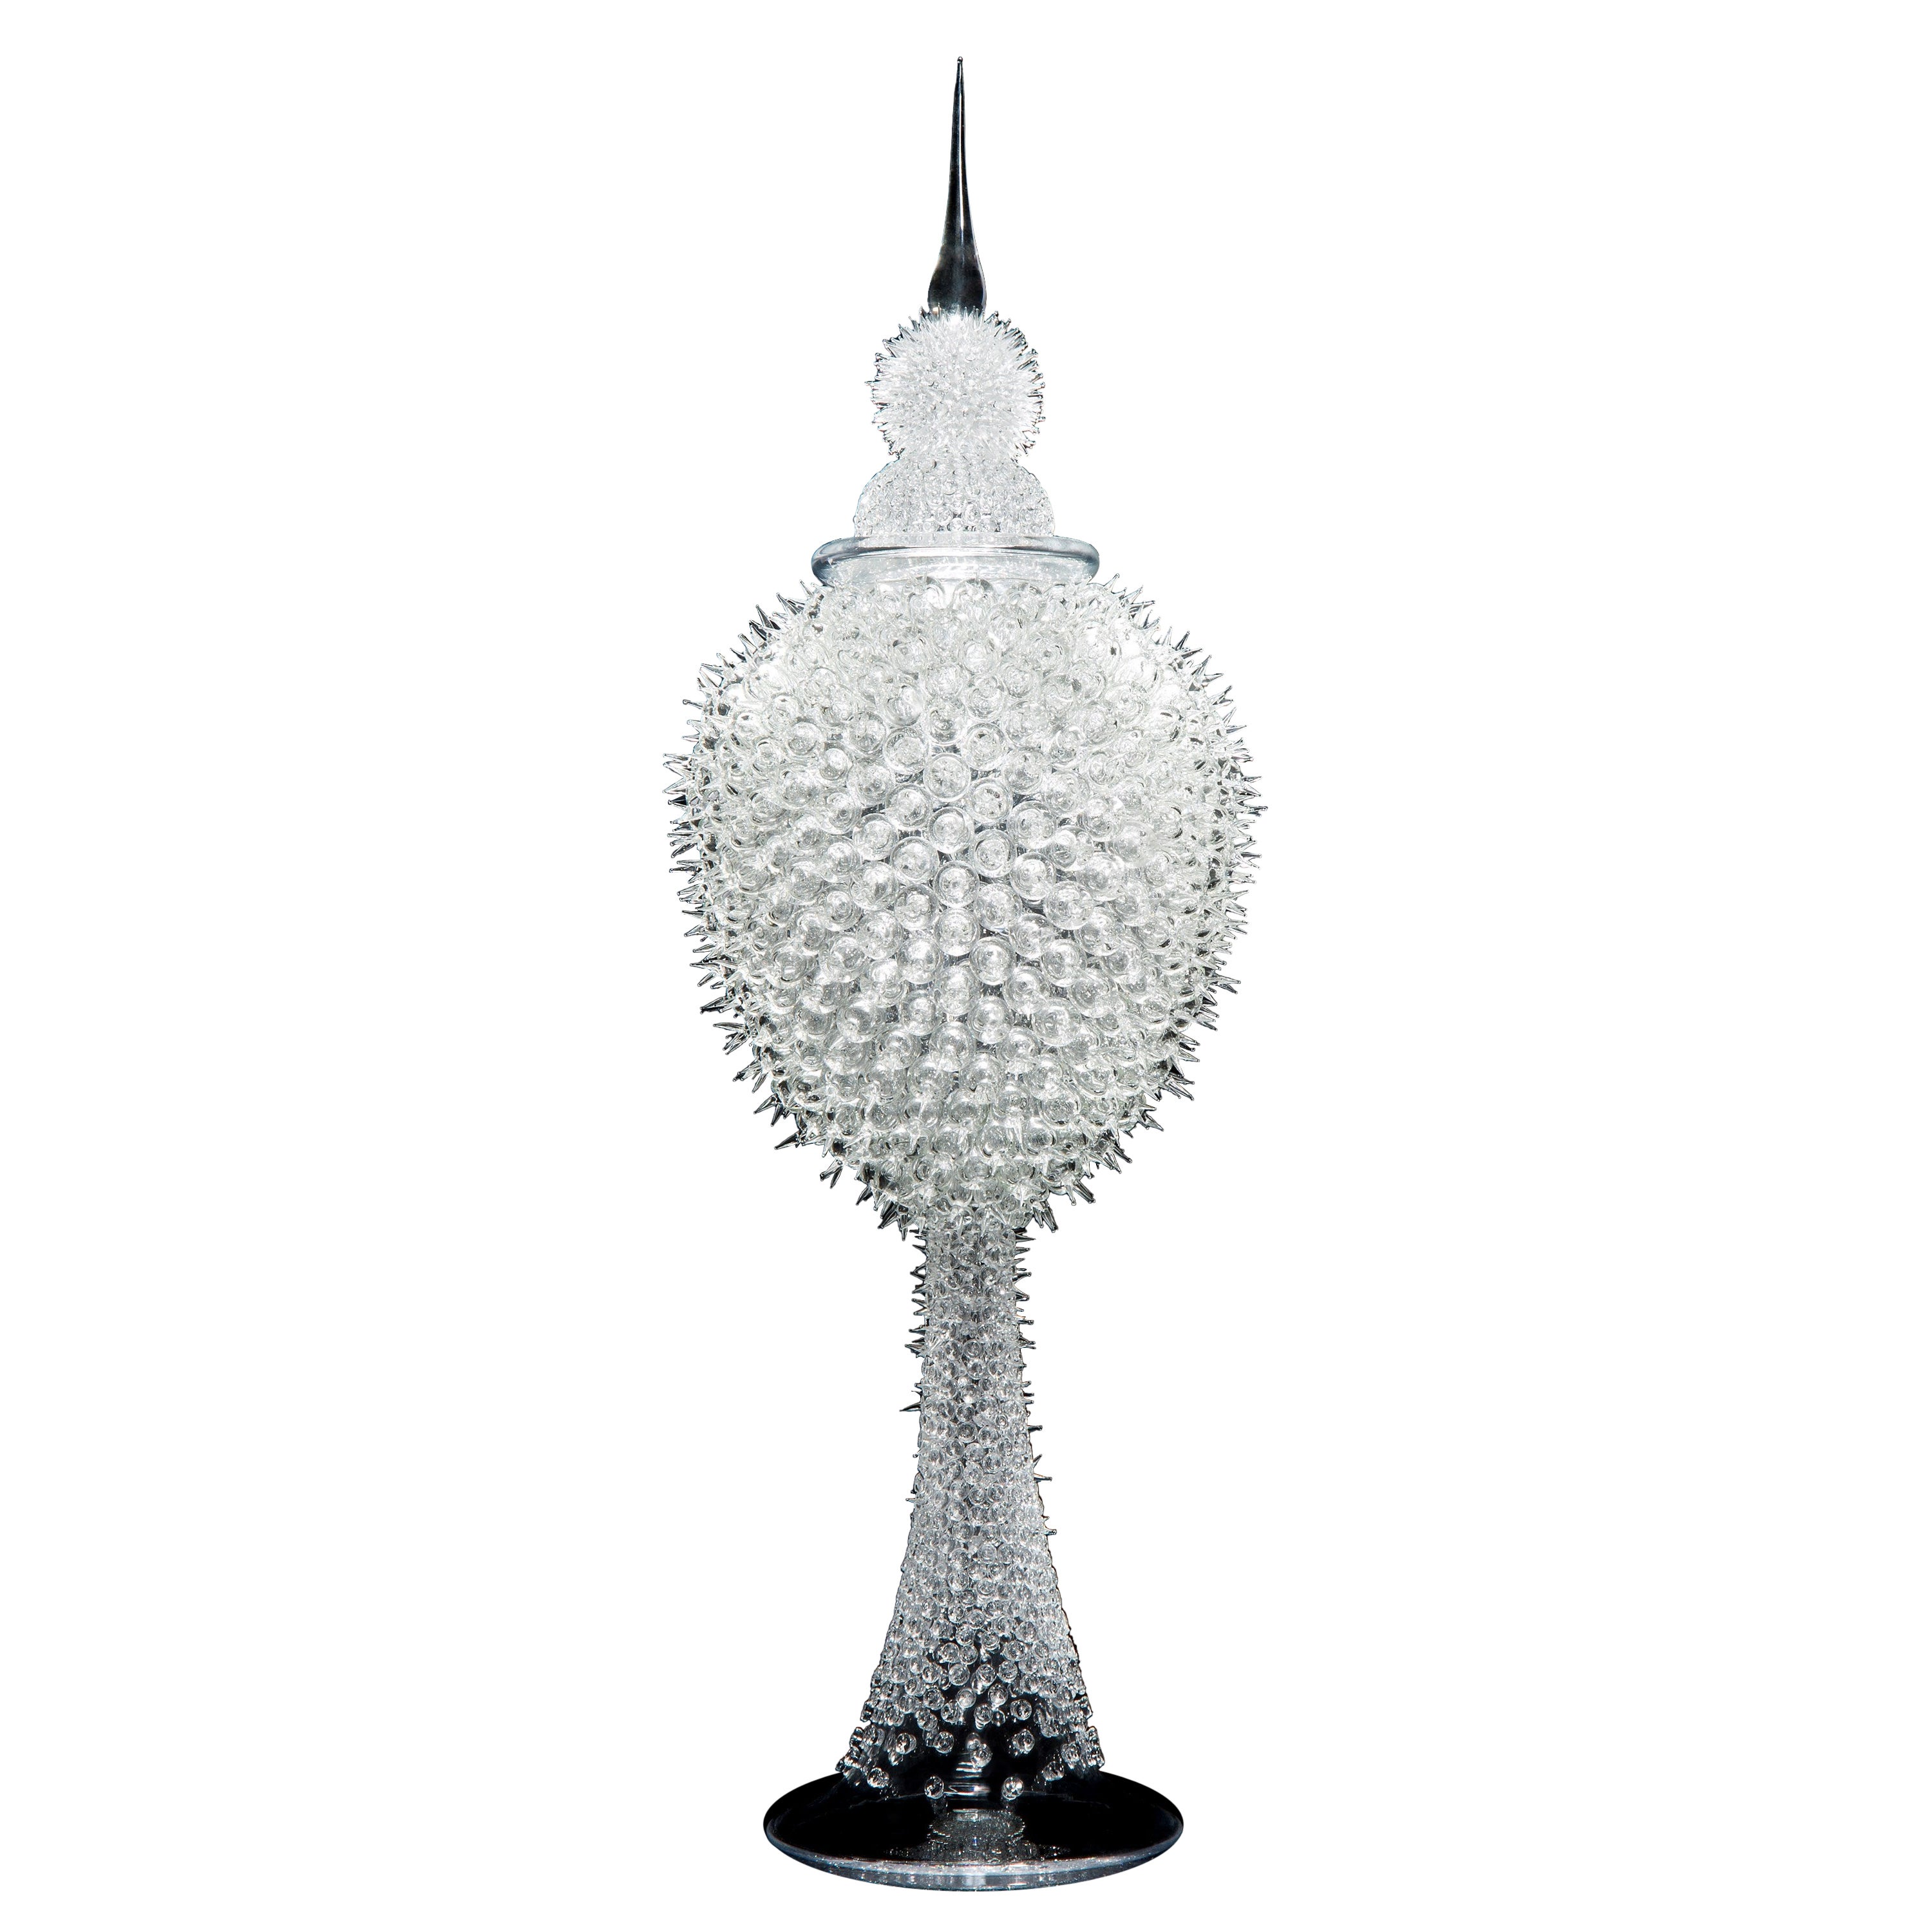 Acanthus Jar, a Clear Spiky Sculptural Vessel with Stopper by James Lethbridge For Sale